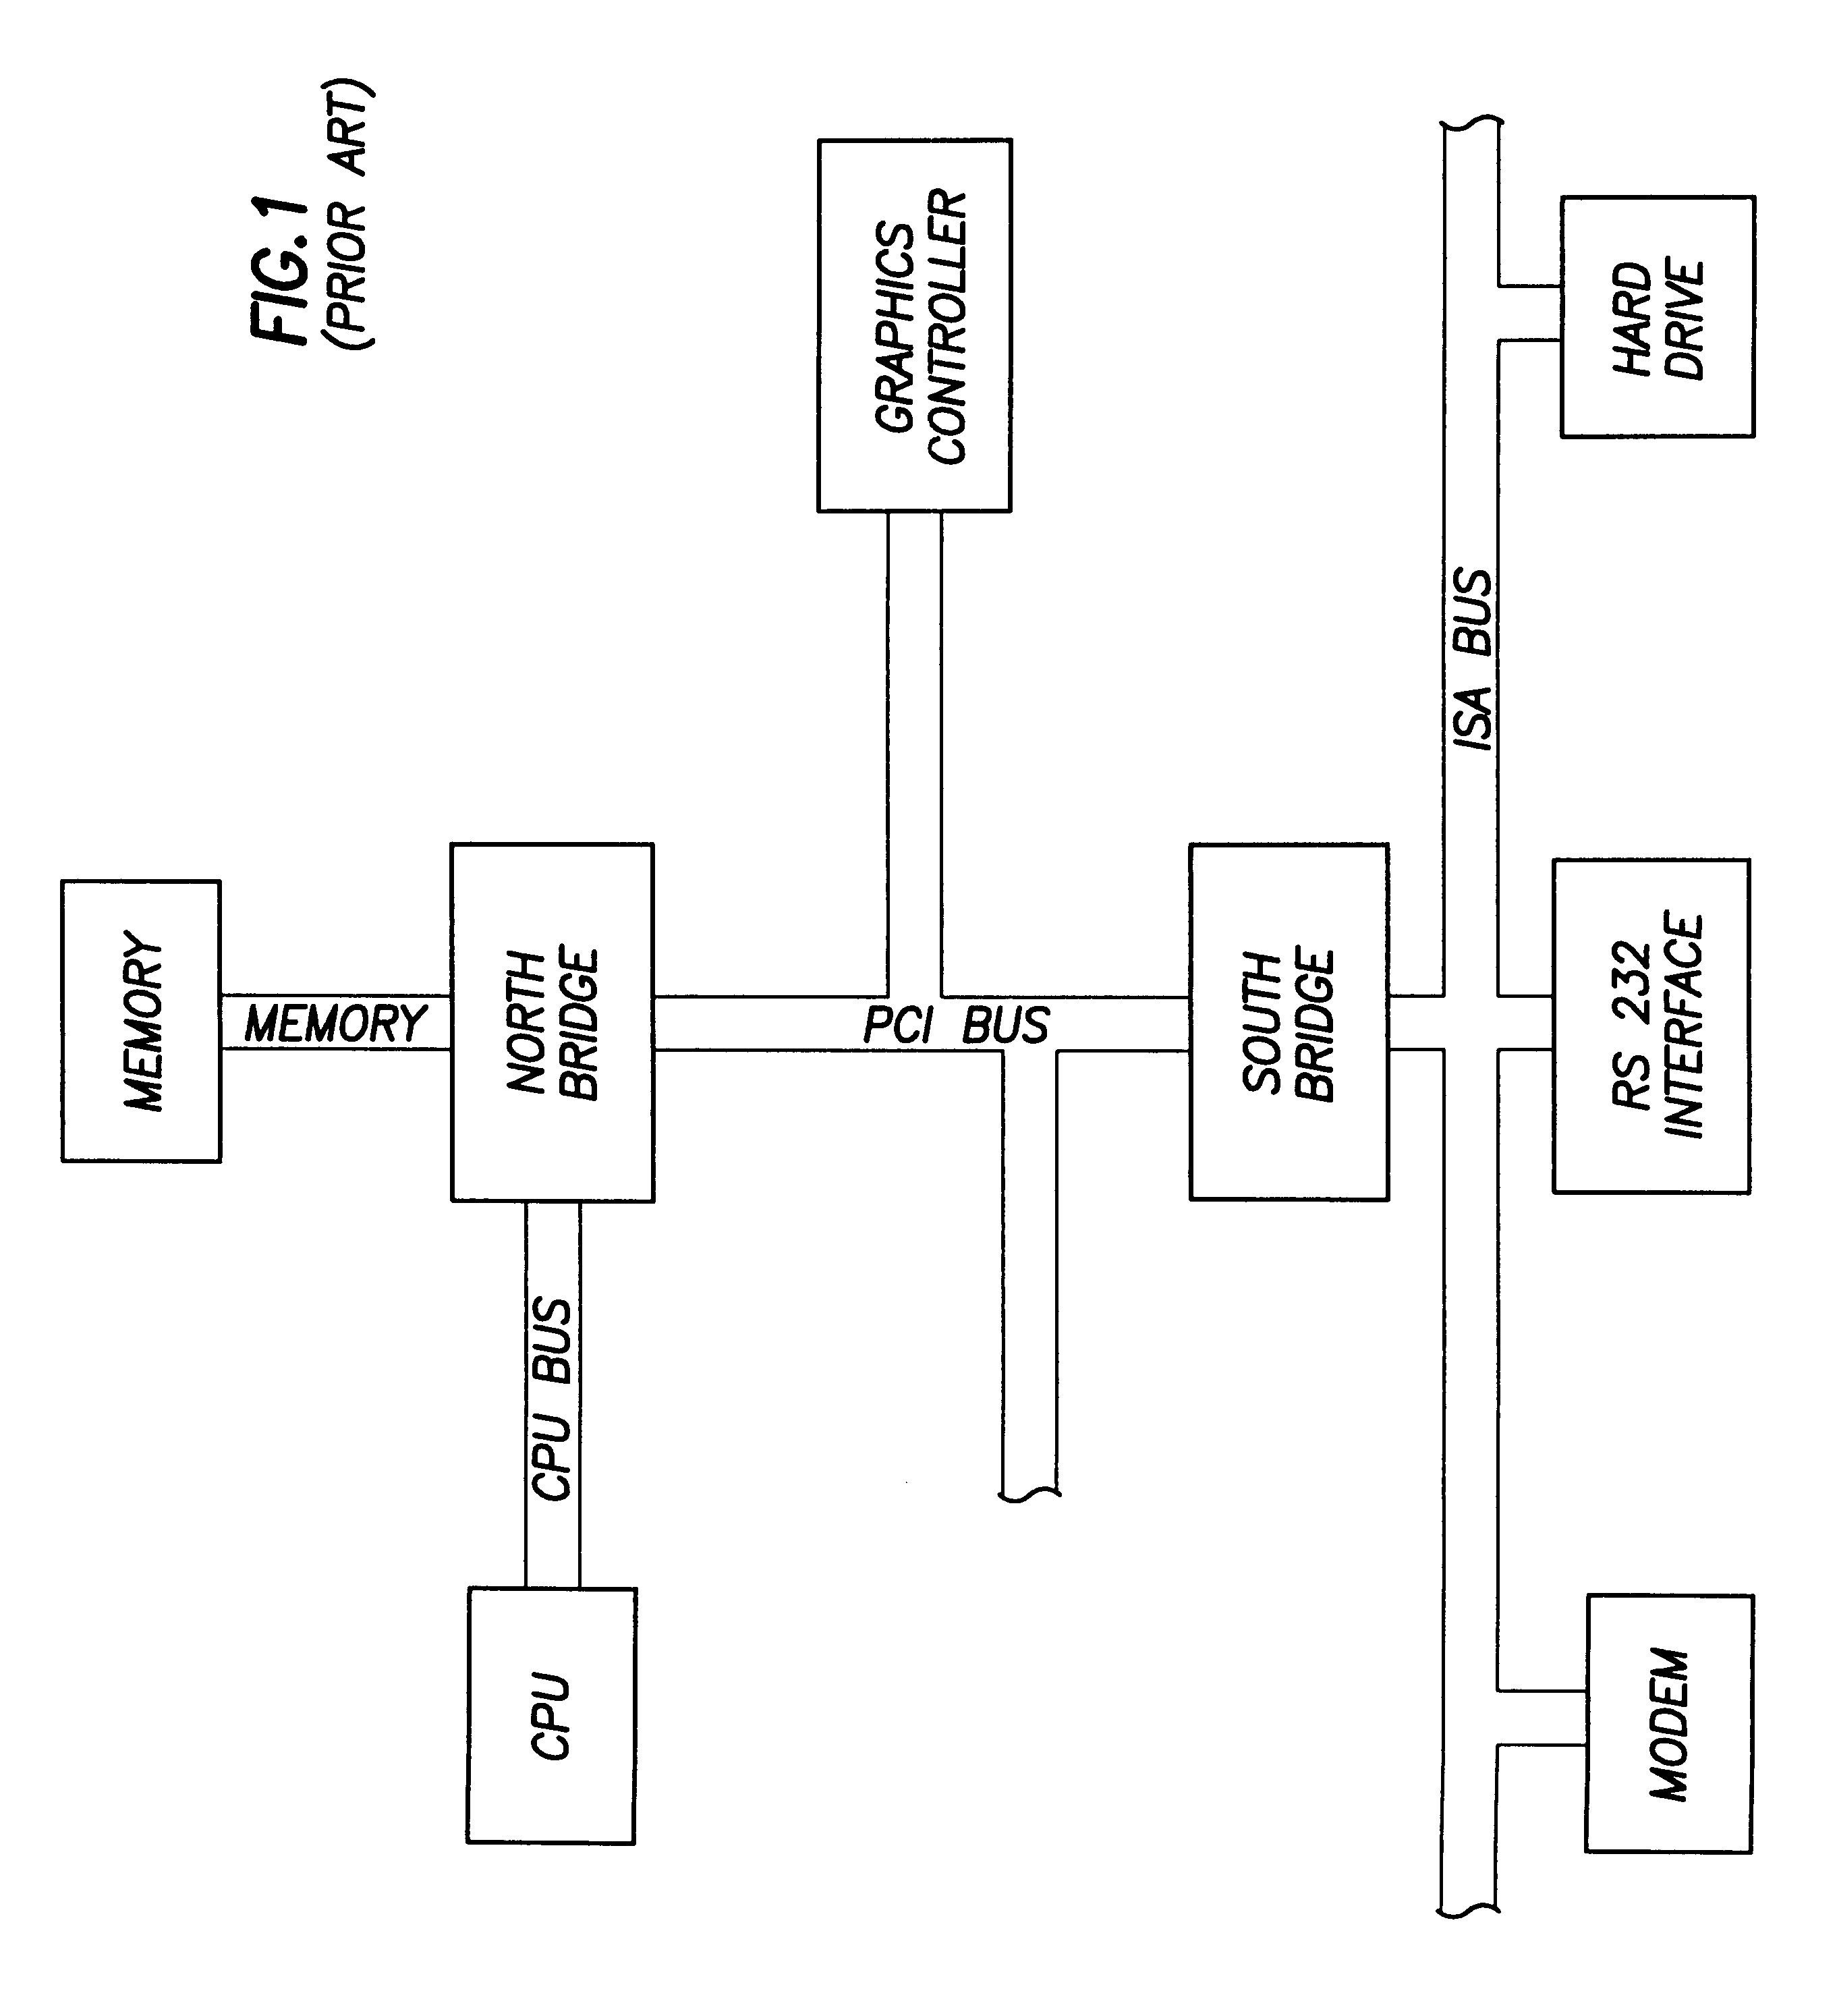 Computer system with bridge logic that asserts a system management interrupt signal when an address is made to a trapped address and which also completes the cycle to the target address